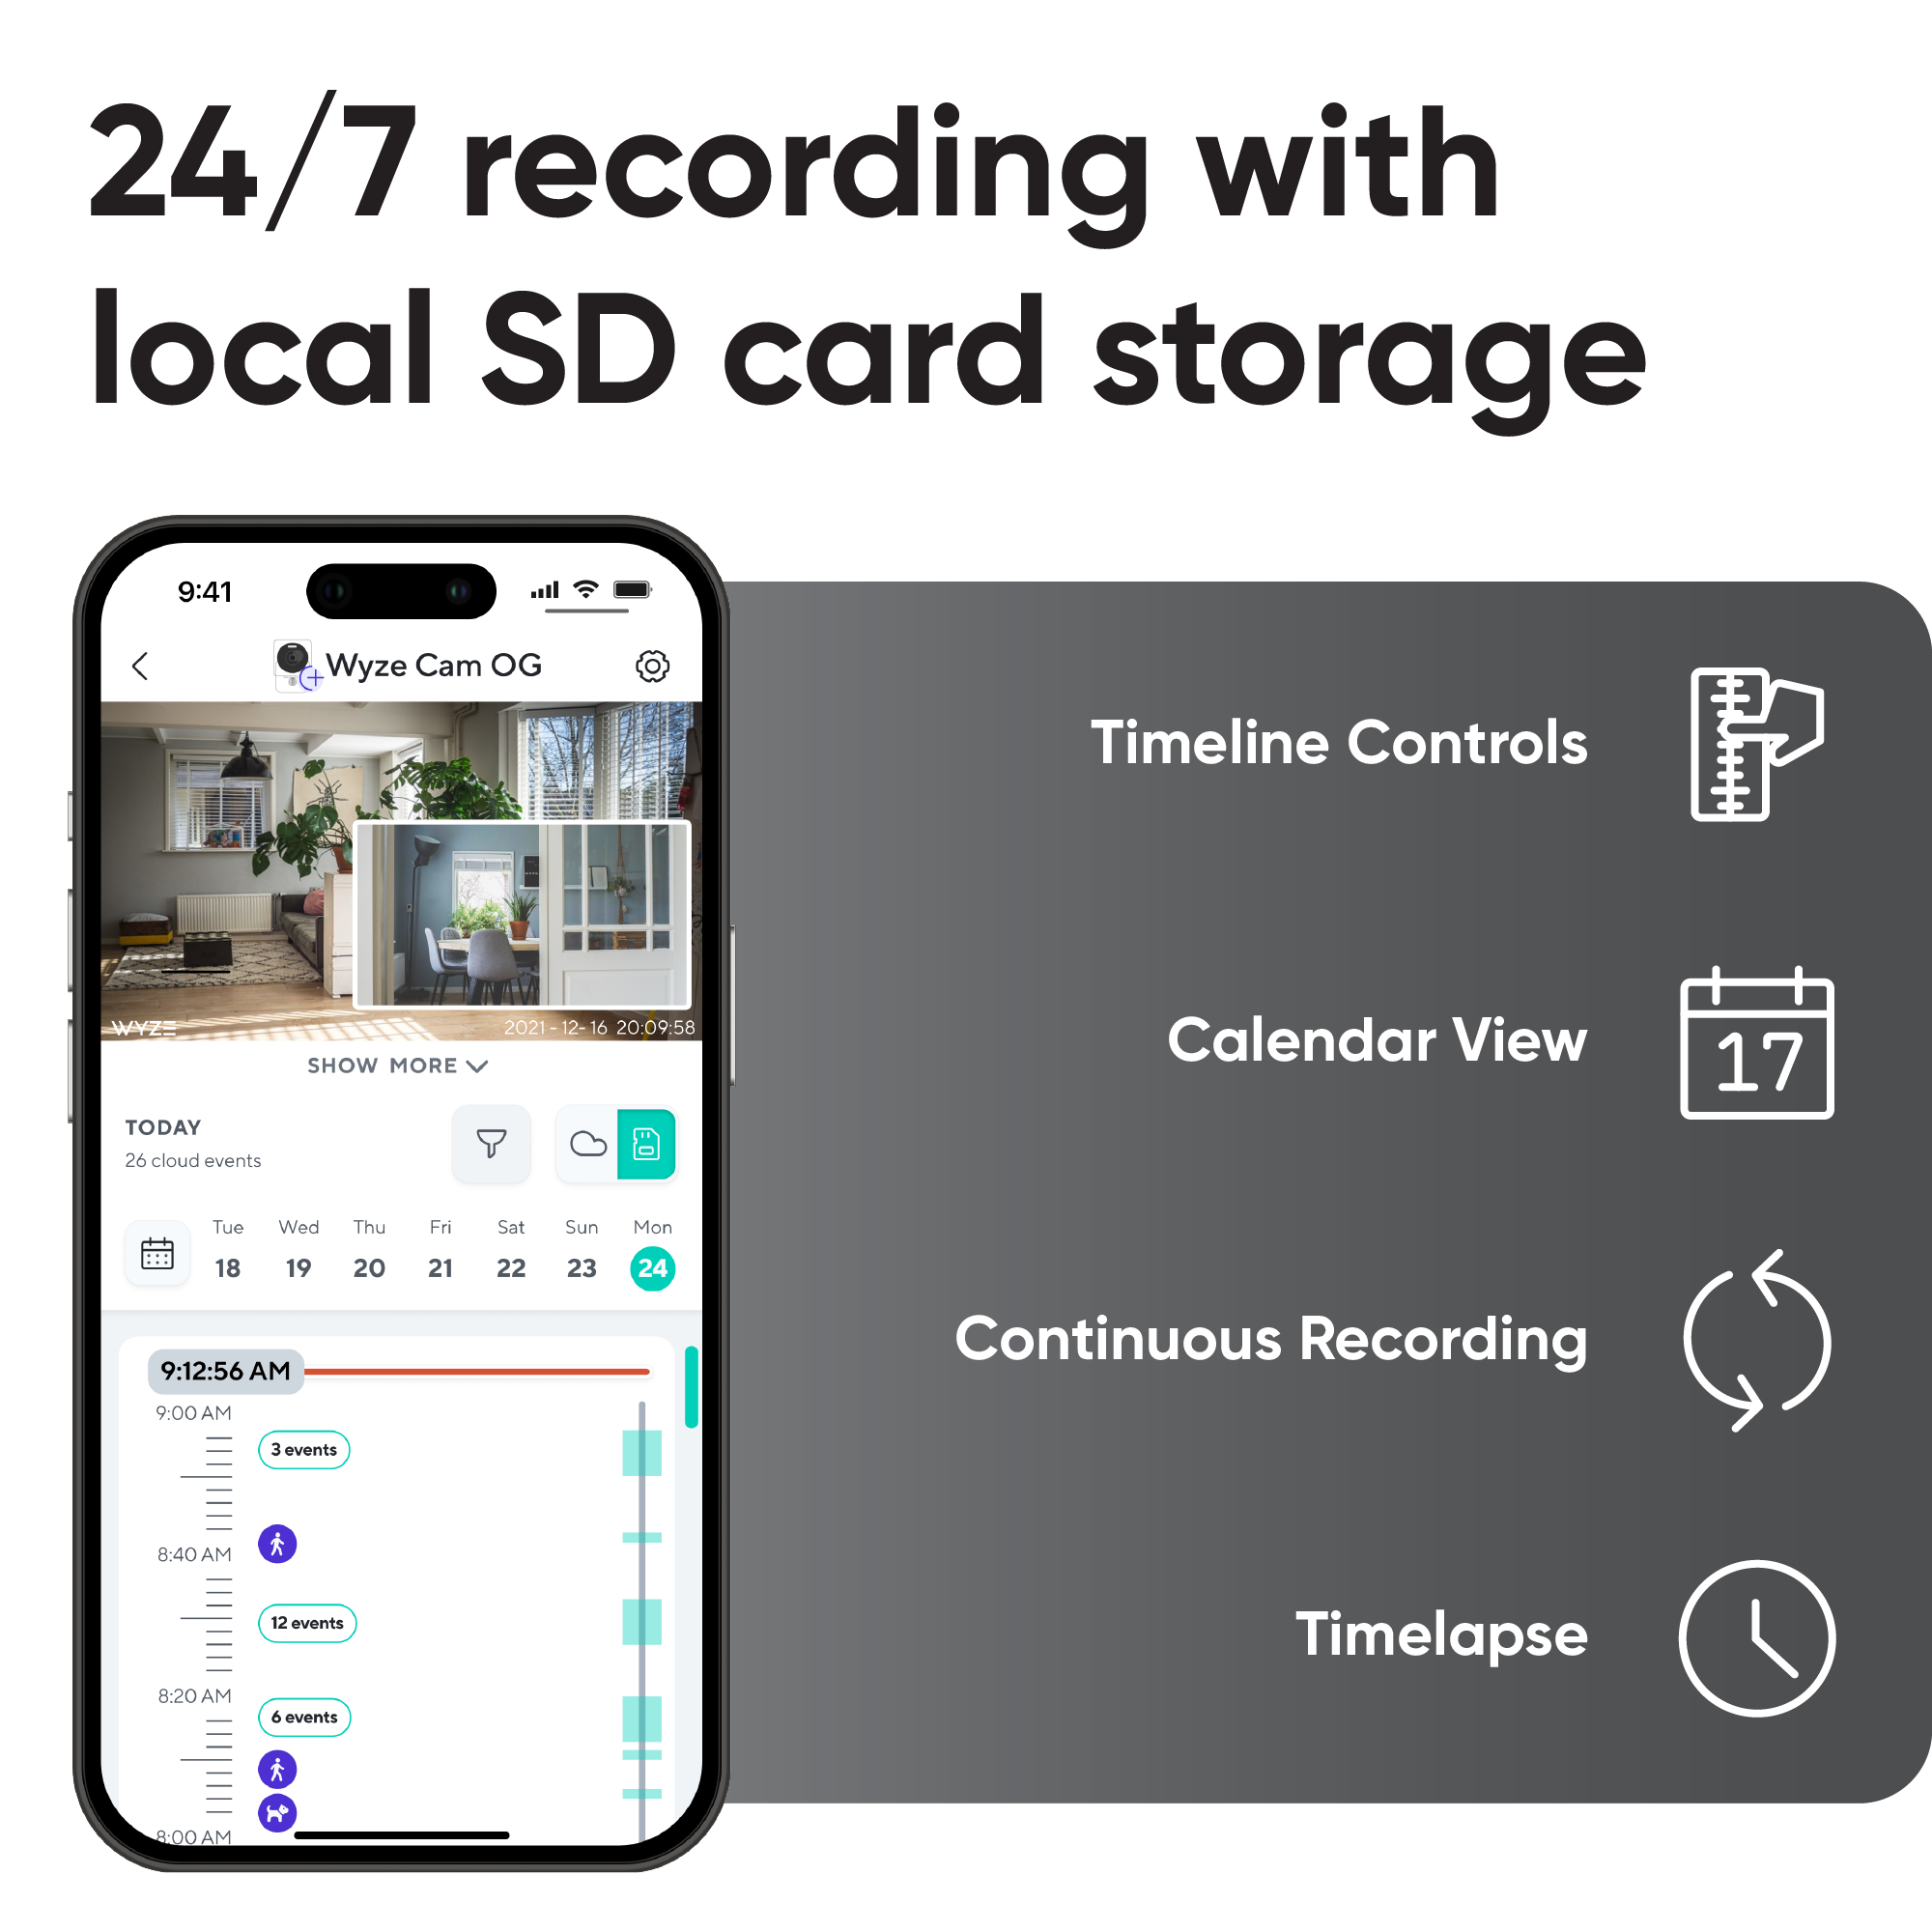 Smartphone with livestream video open on the screen. White text overlay of local microSD card storage features: timeline, calendar view, continuous recording, and timelapse..